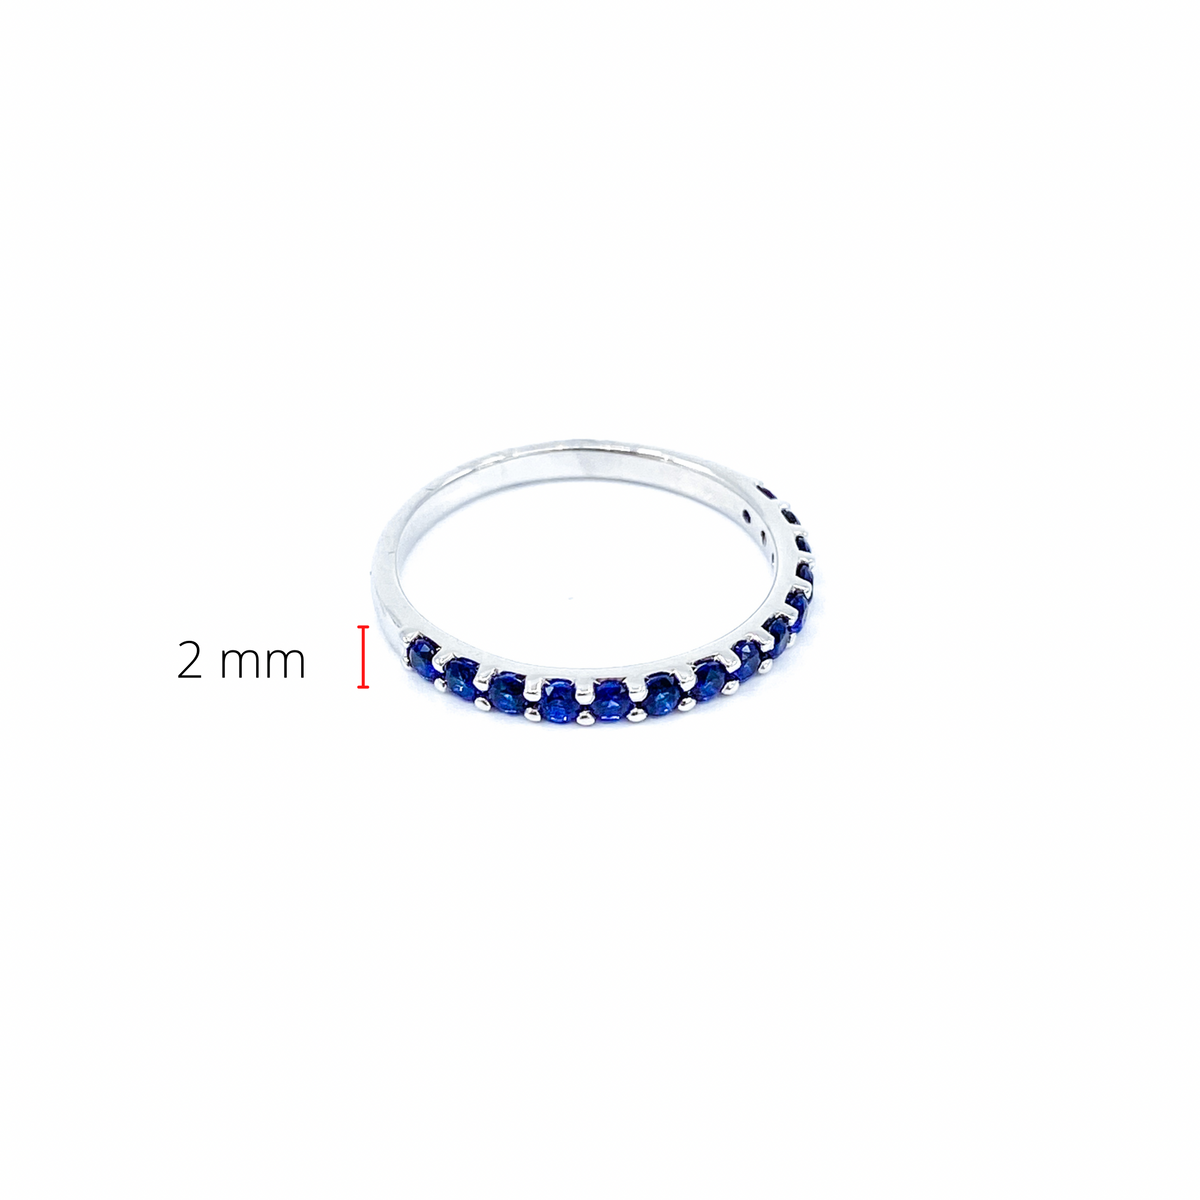 10K White Gold Created Sapphire Ring, size 6.5